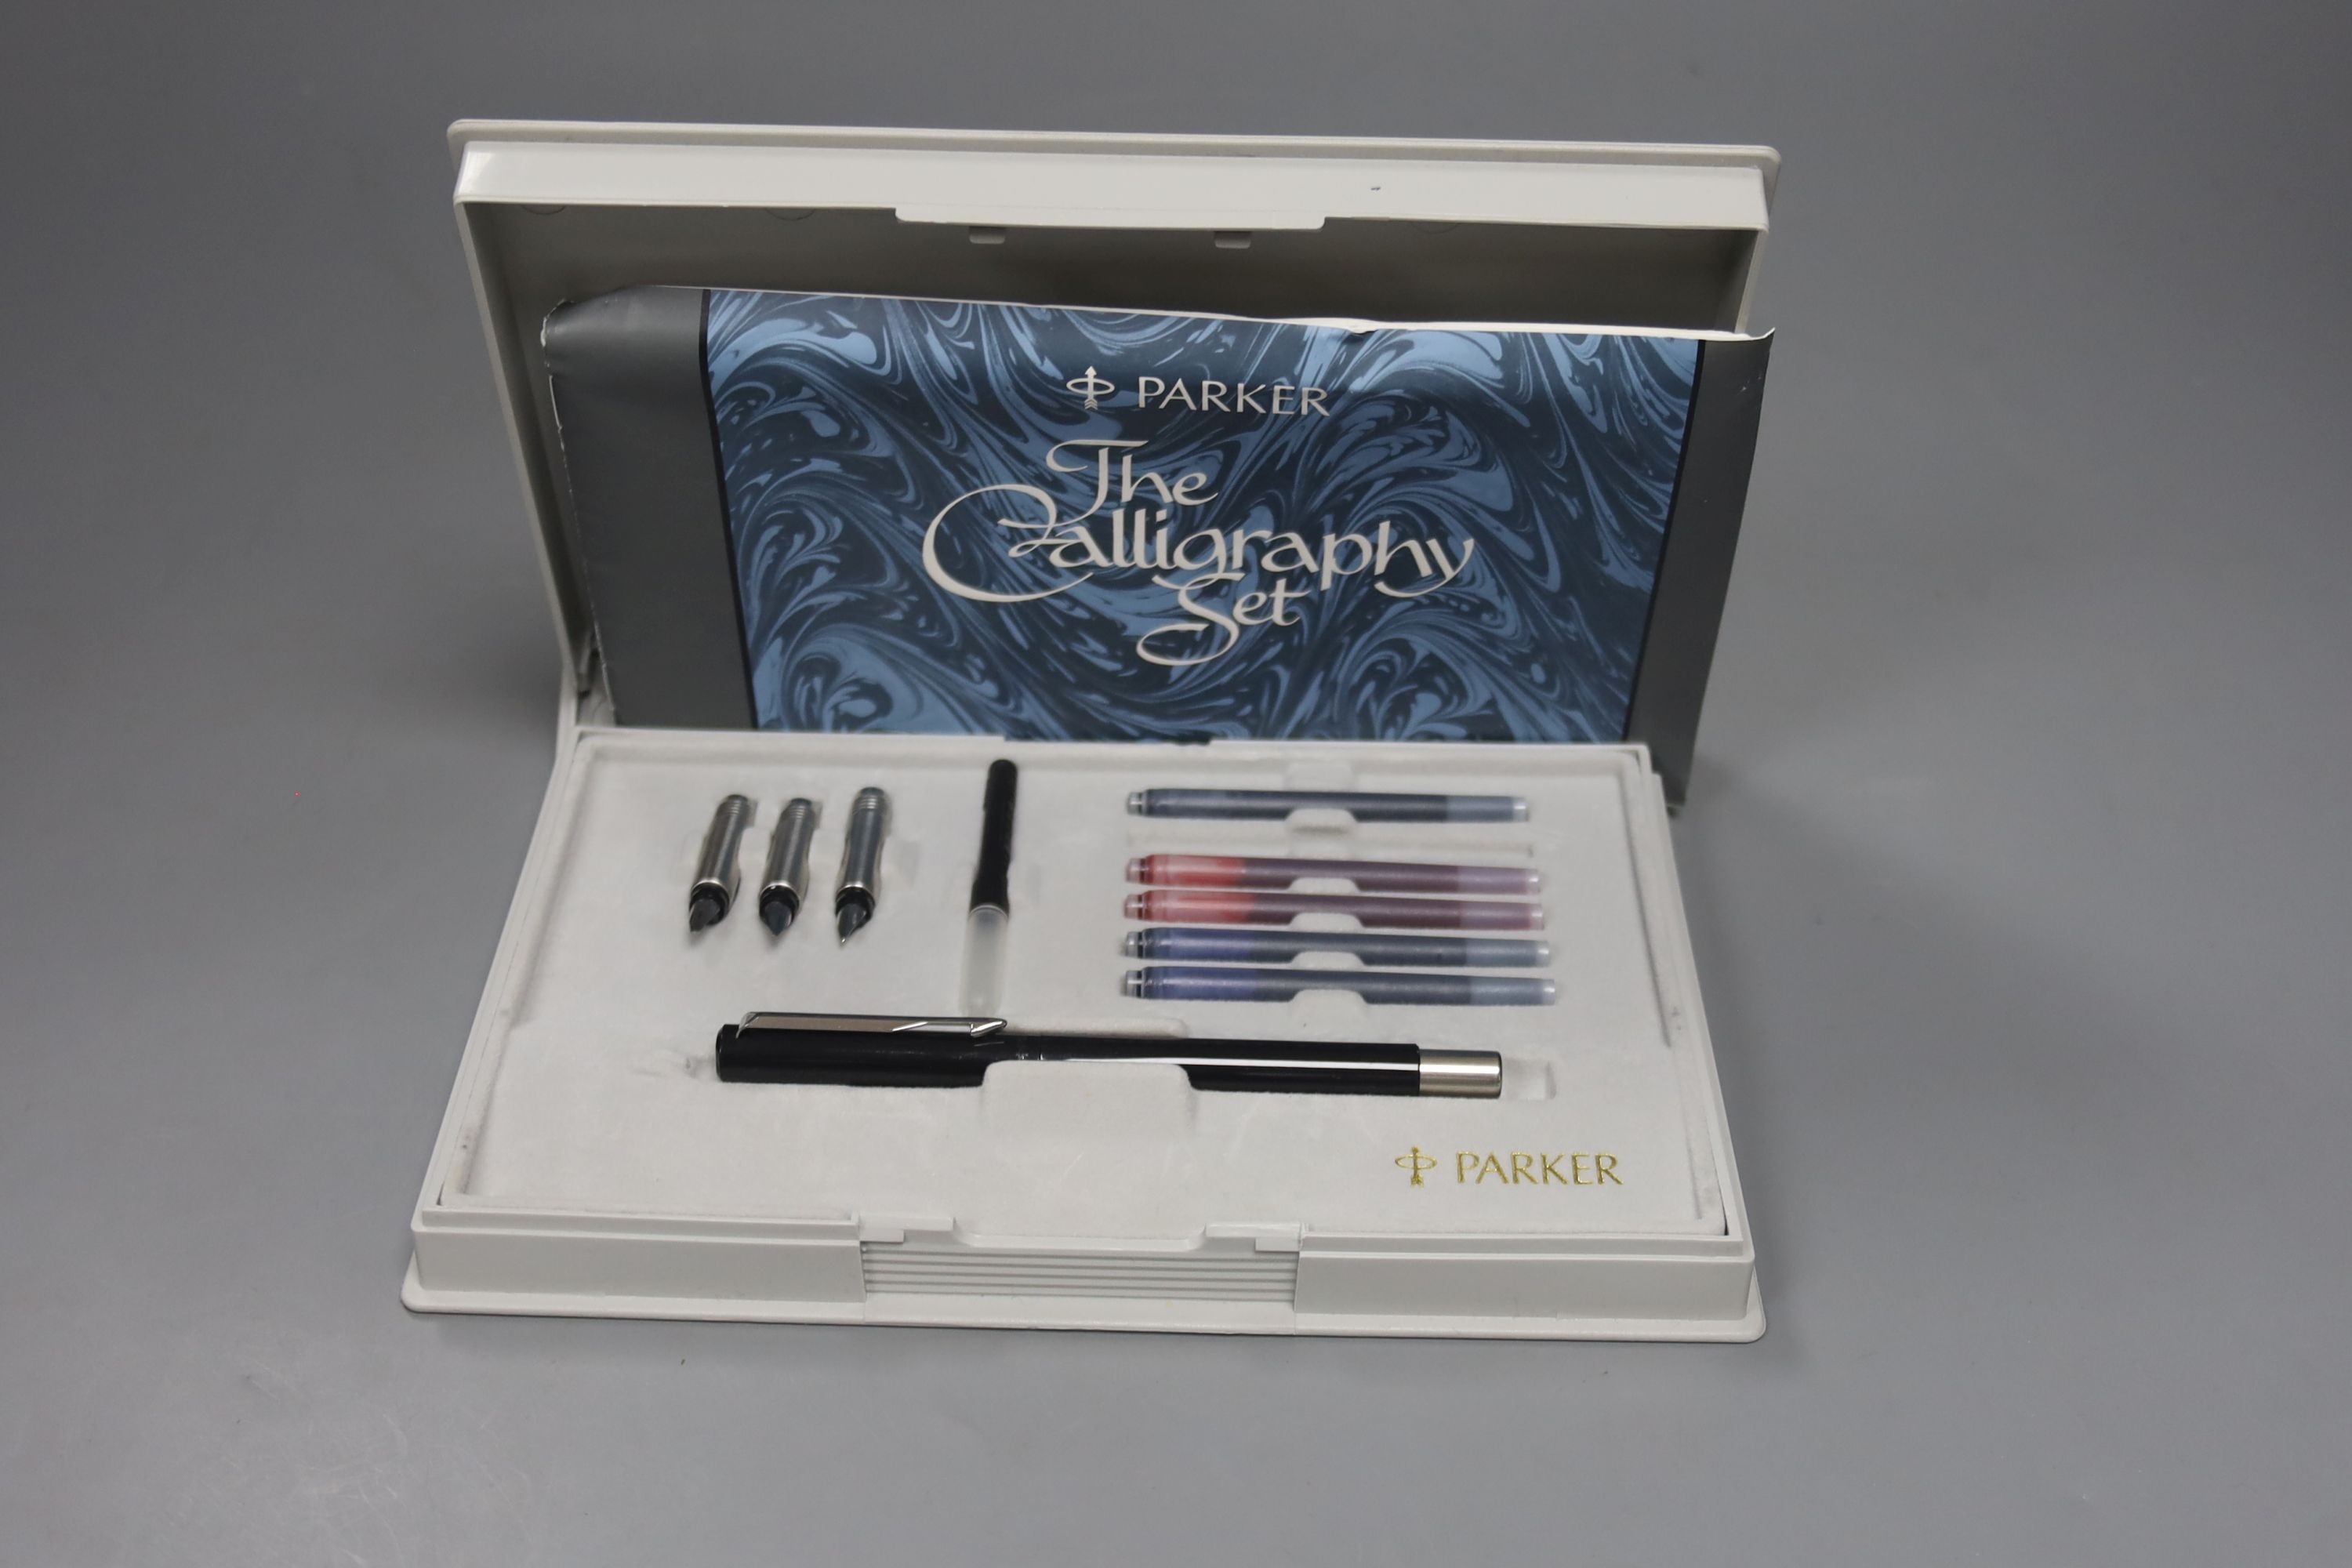 A Parker pen stand, boxed Parker Duofold and Parker Calligraphy set